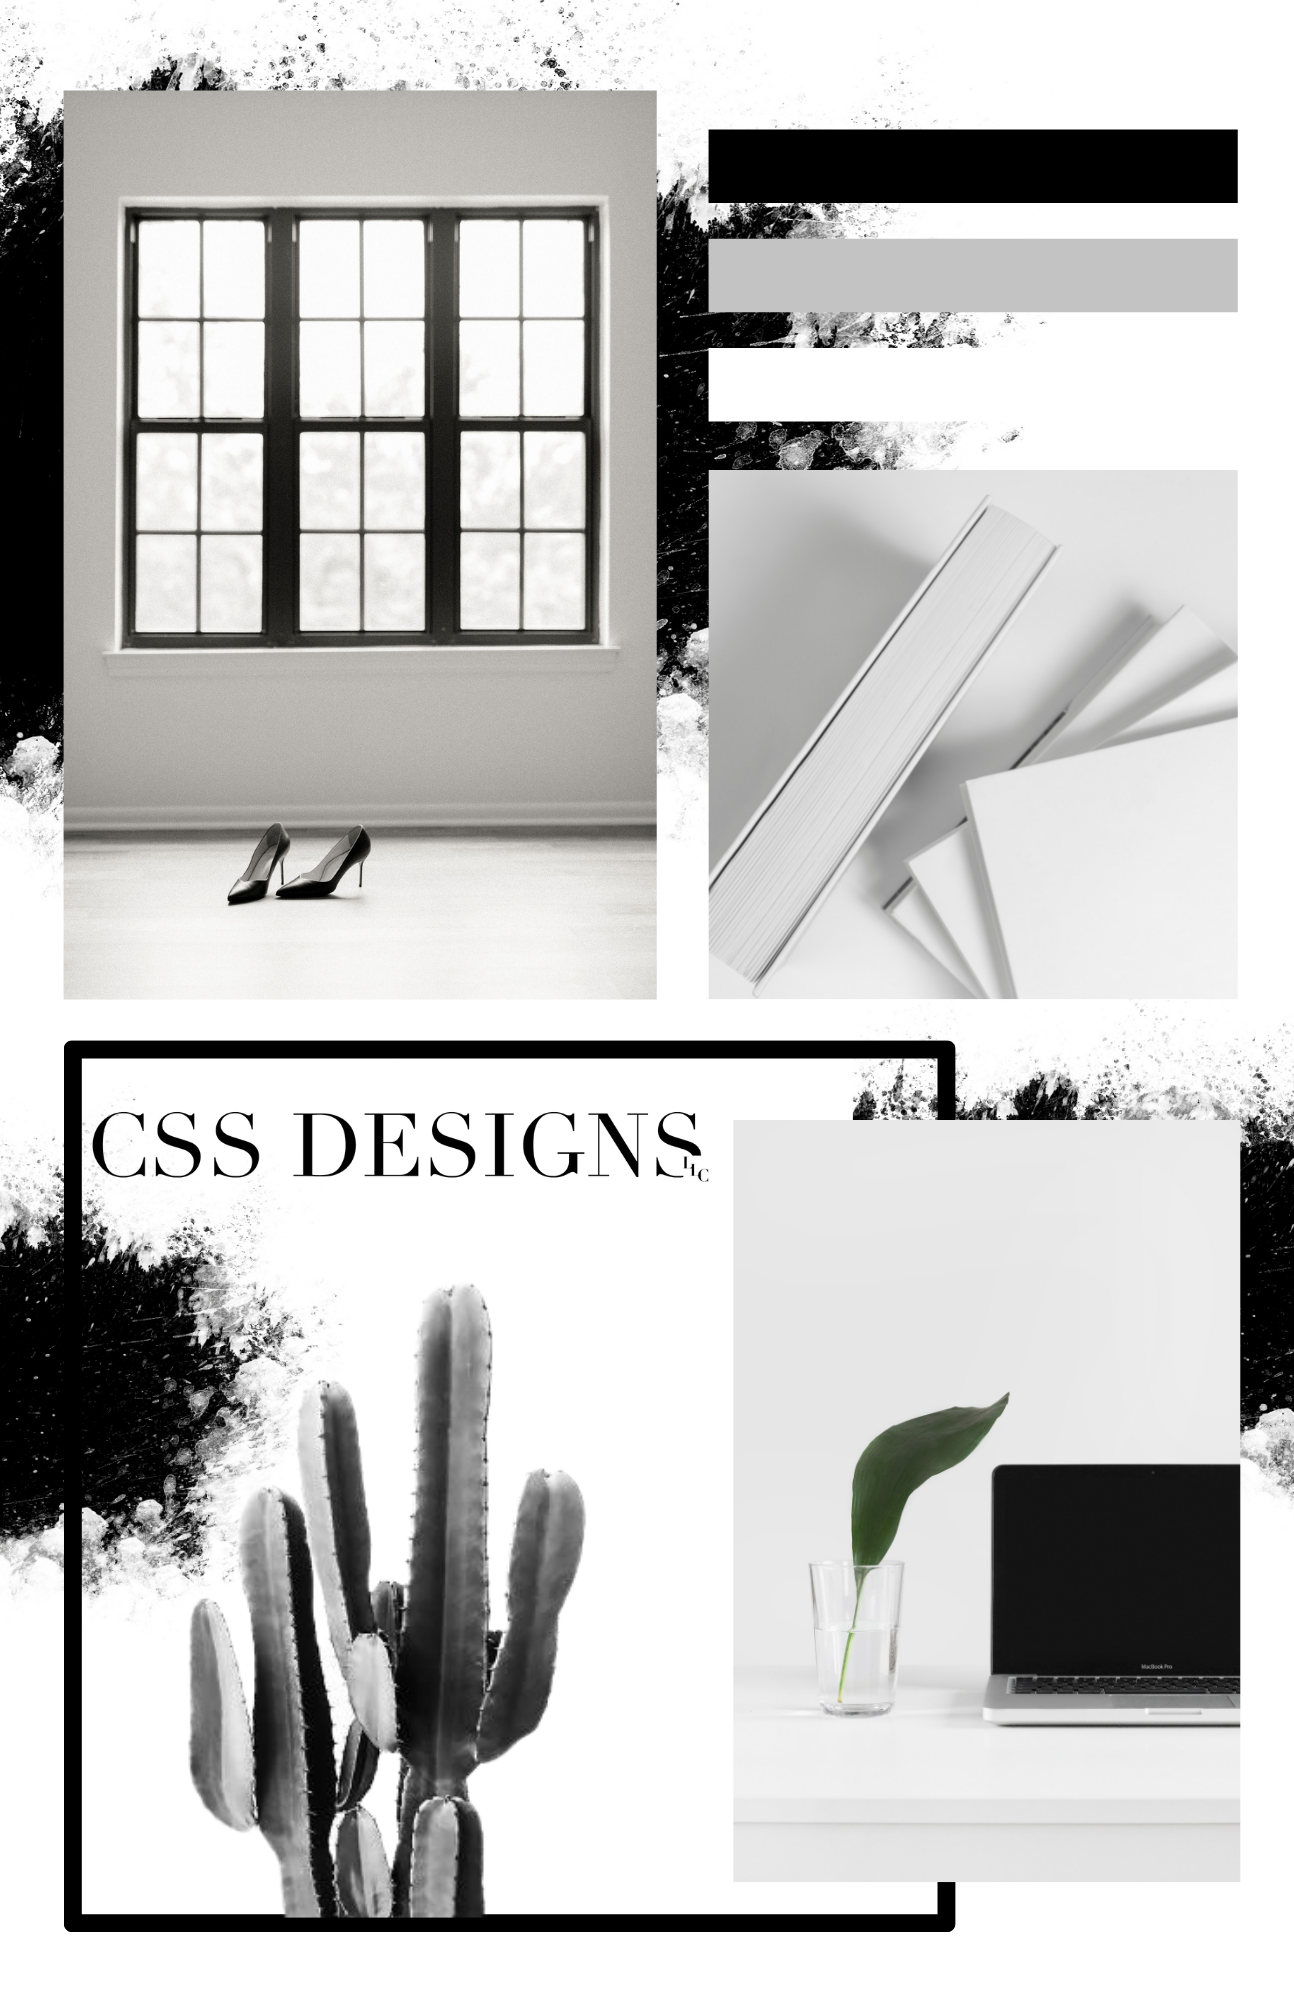 How To: Create An Effective Moodboard